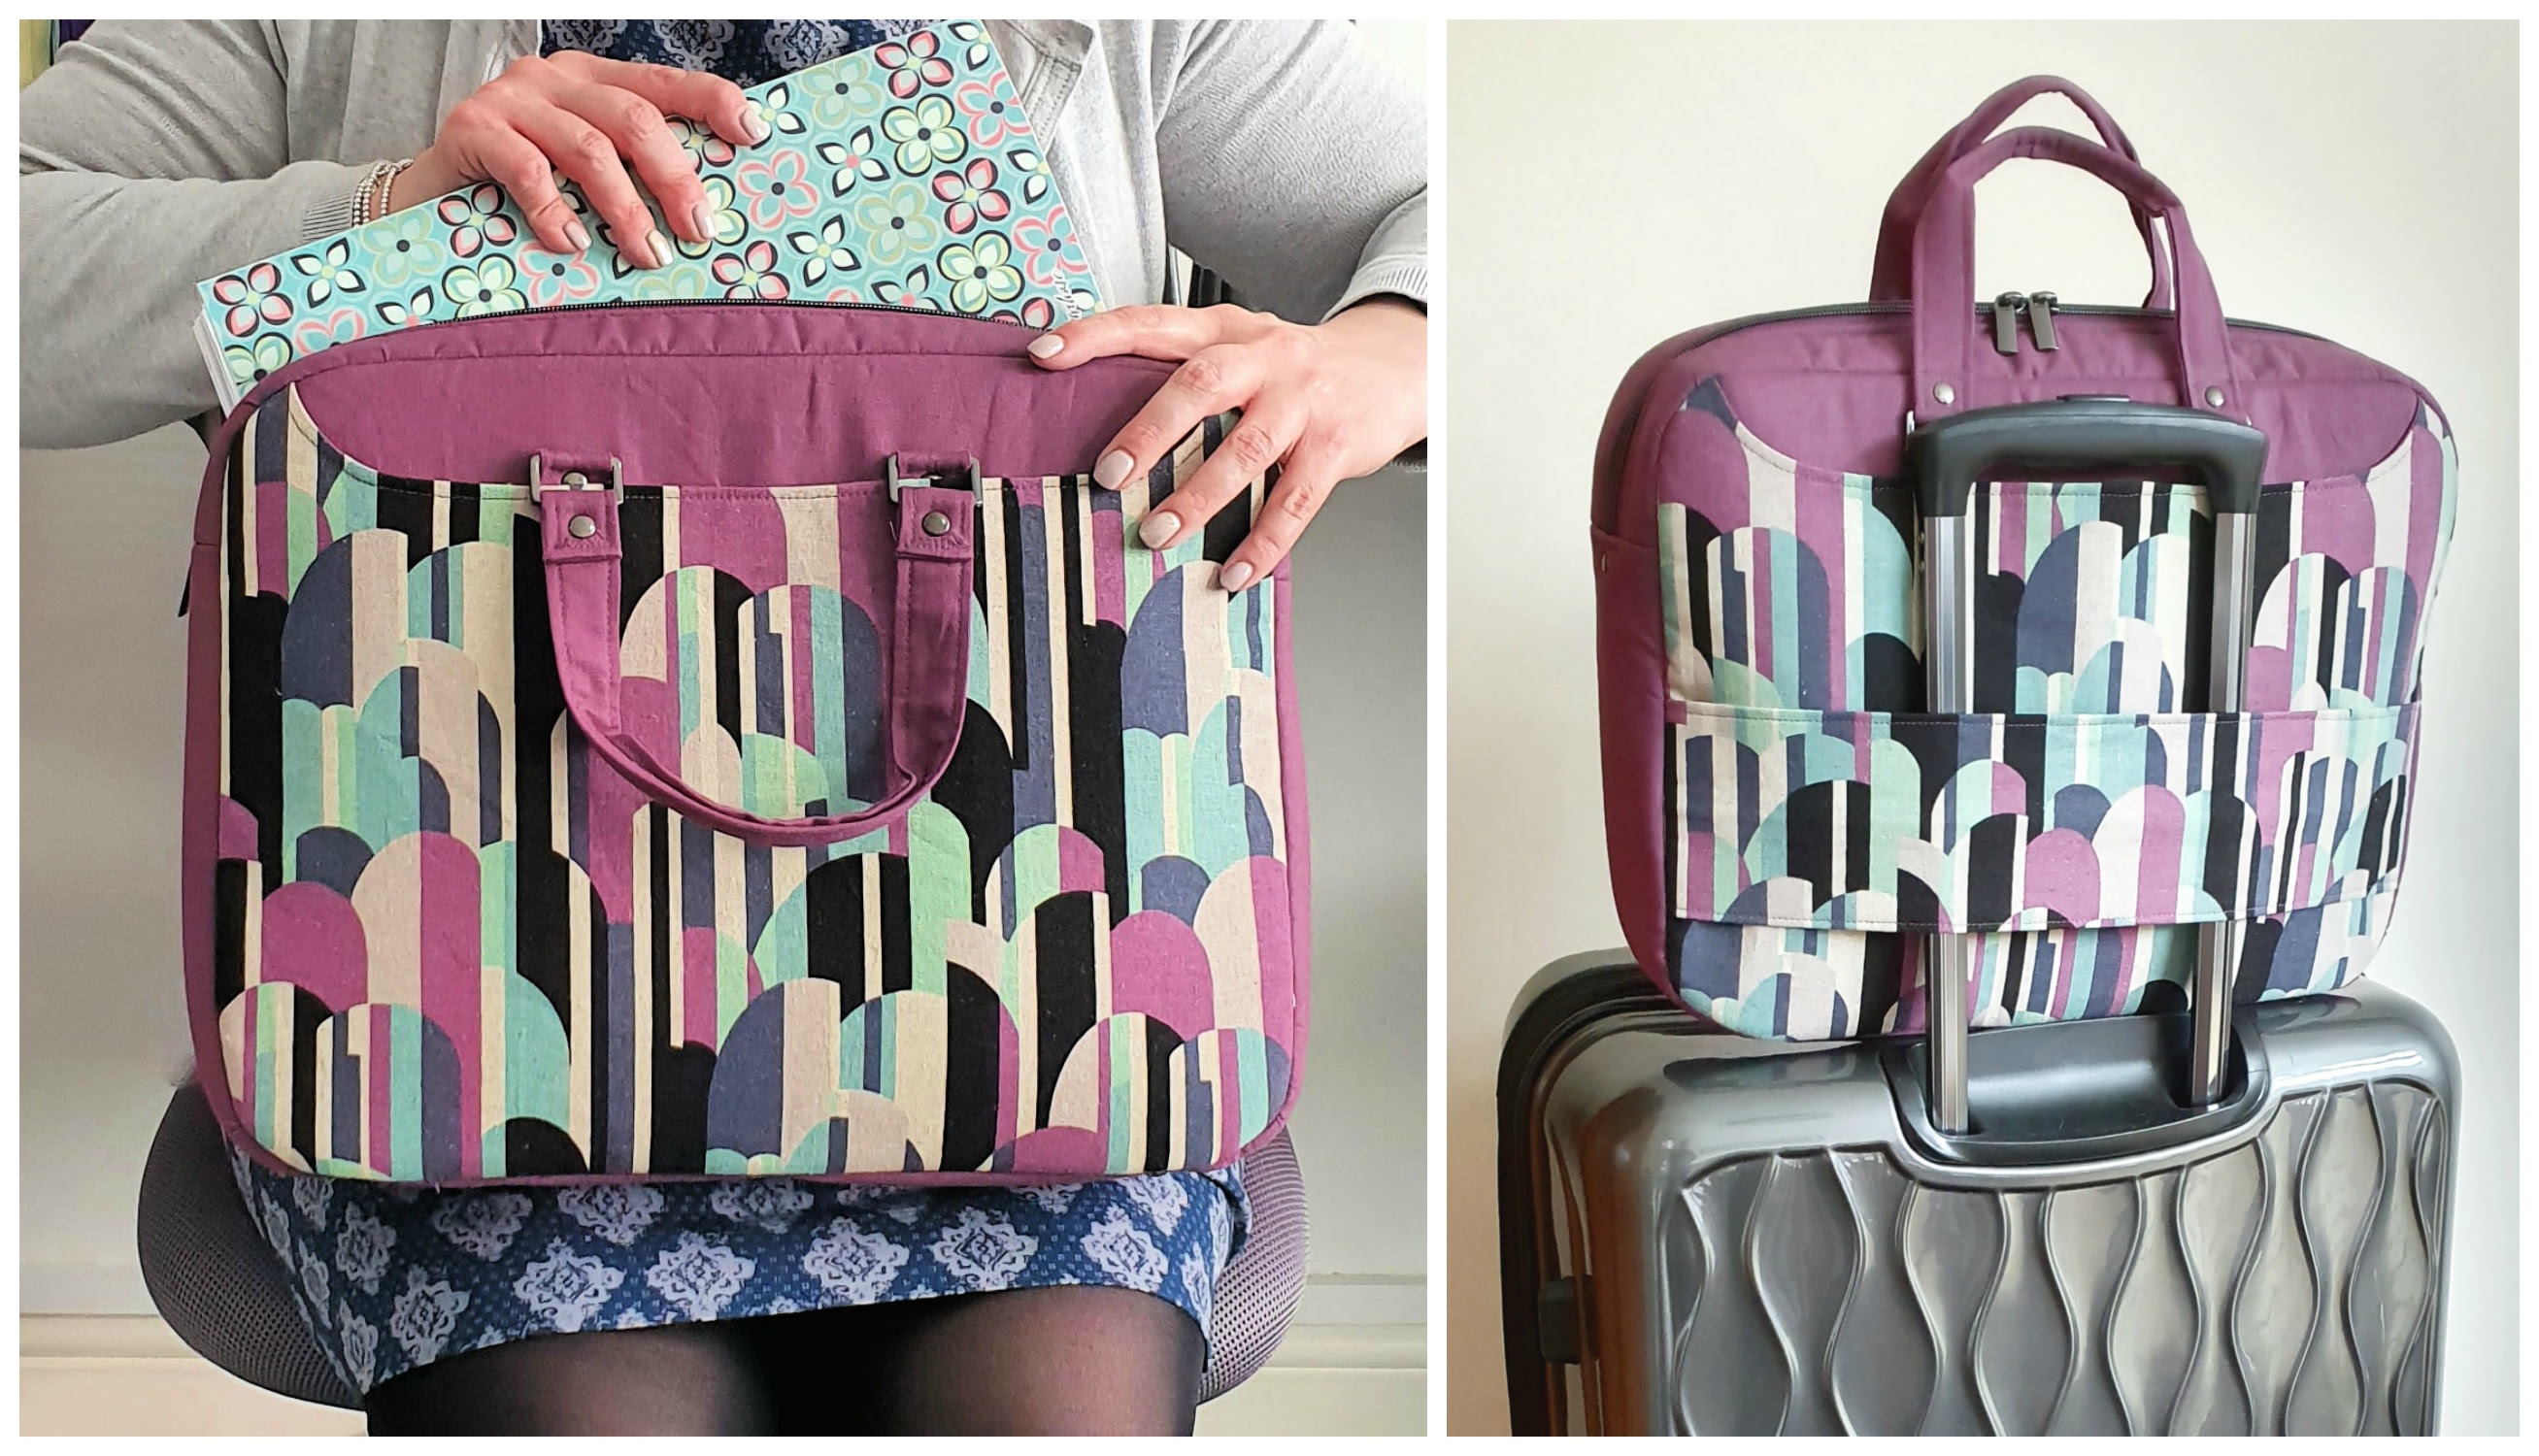 The Side Hustle bag sewing pattern, by Sewing Patterns by Mrs H